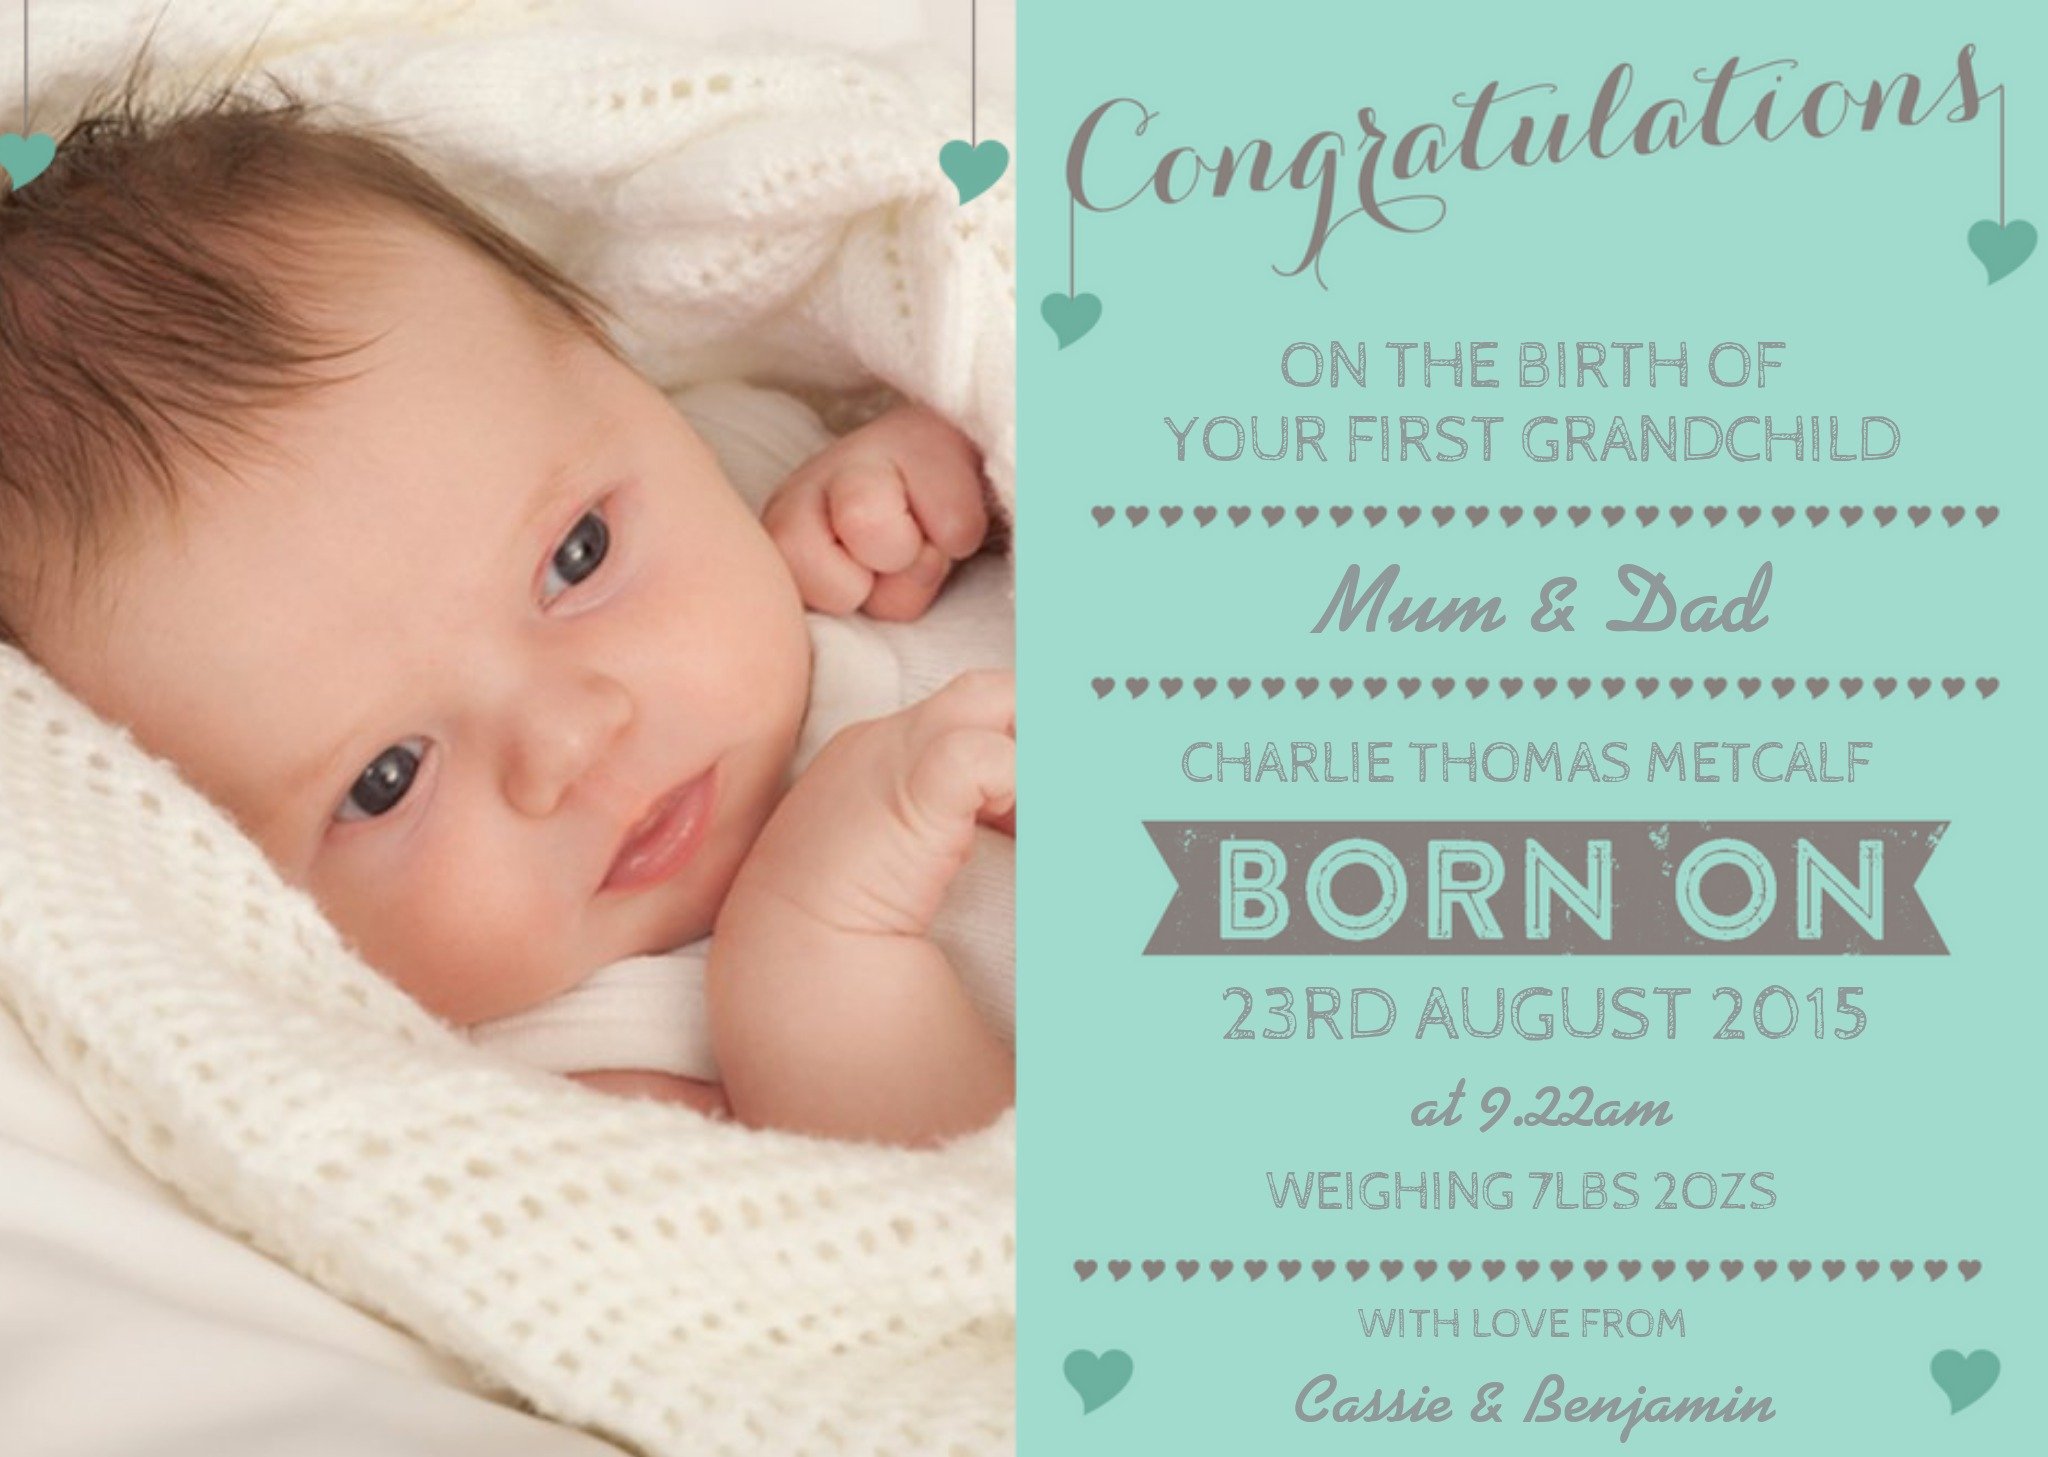 Moonpig Congratulations On The Birth Of Your First Grandchild, Large Card